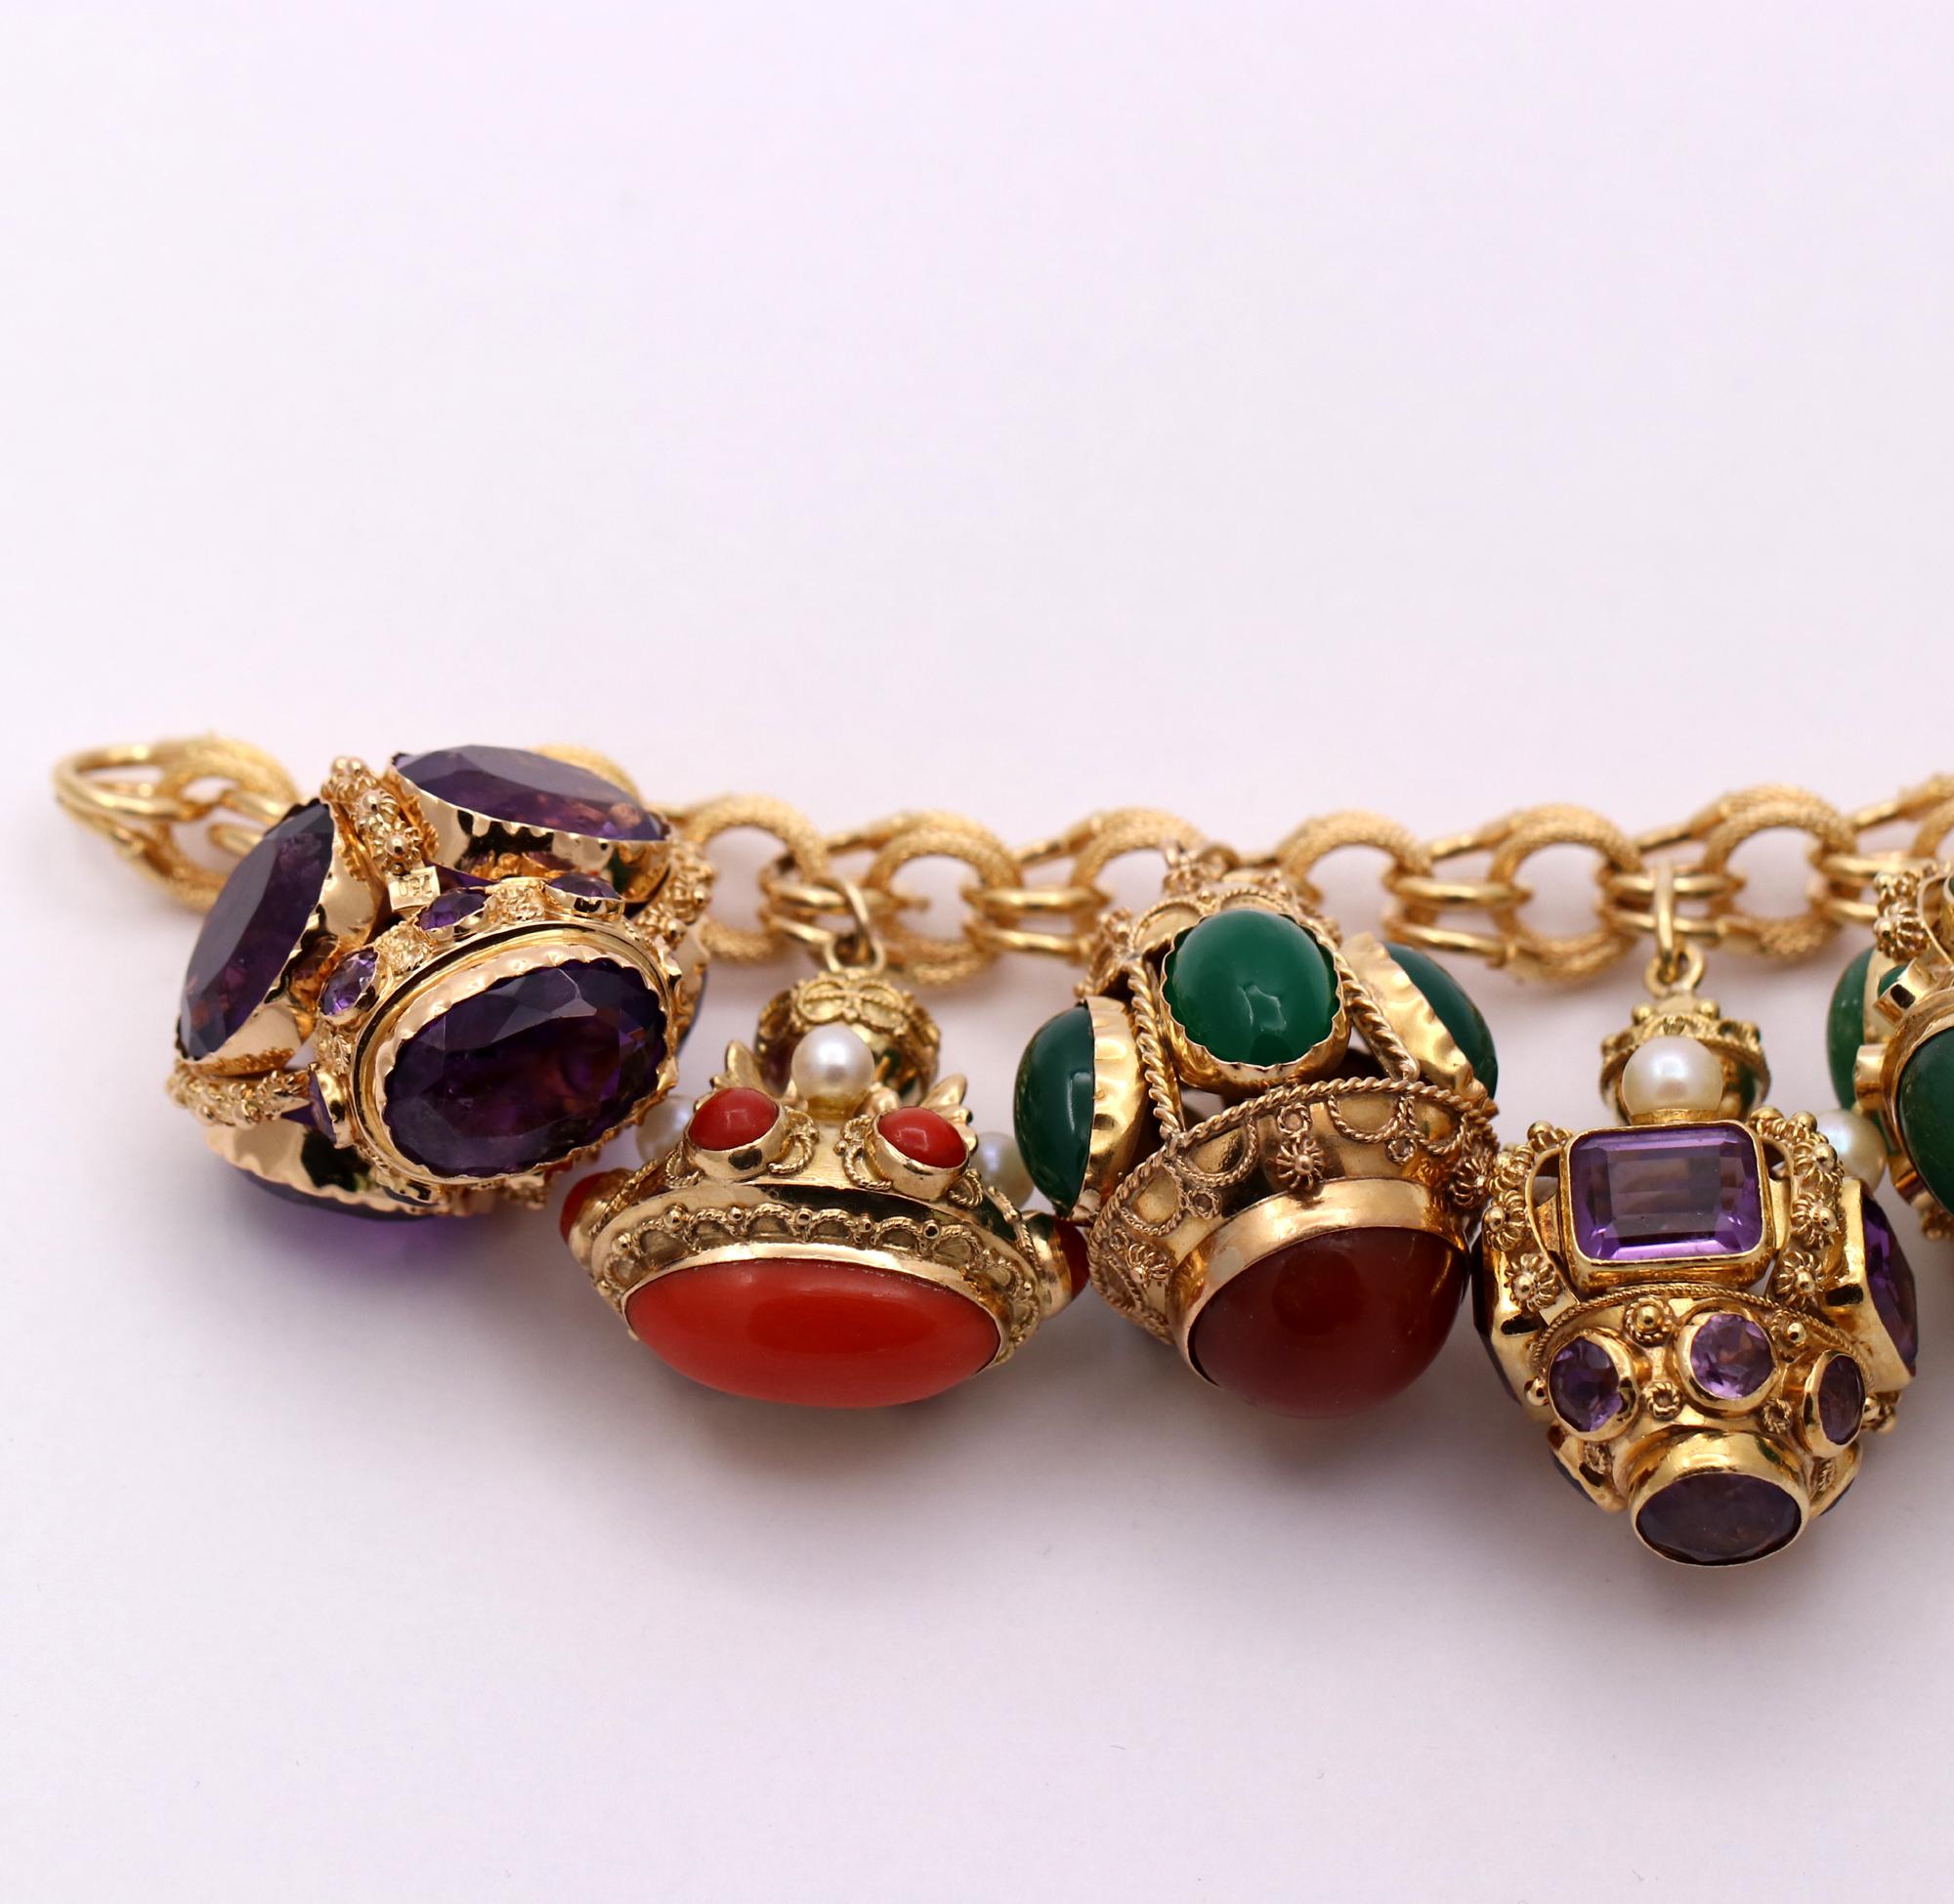 Women's Midcentury Large Italian Gold Charm Bracelet with Assorted Colored Stones